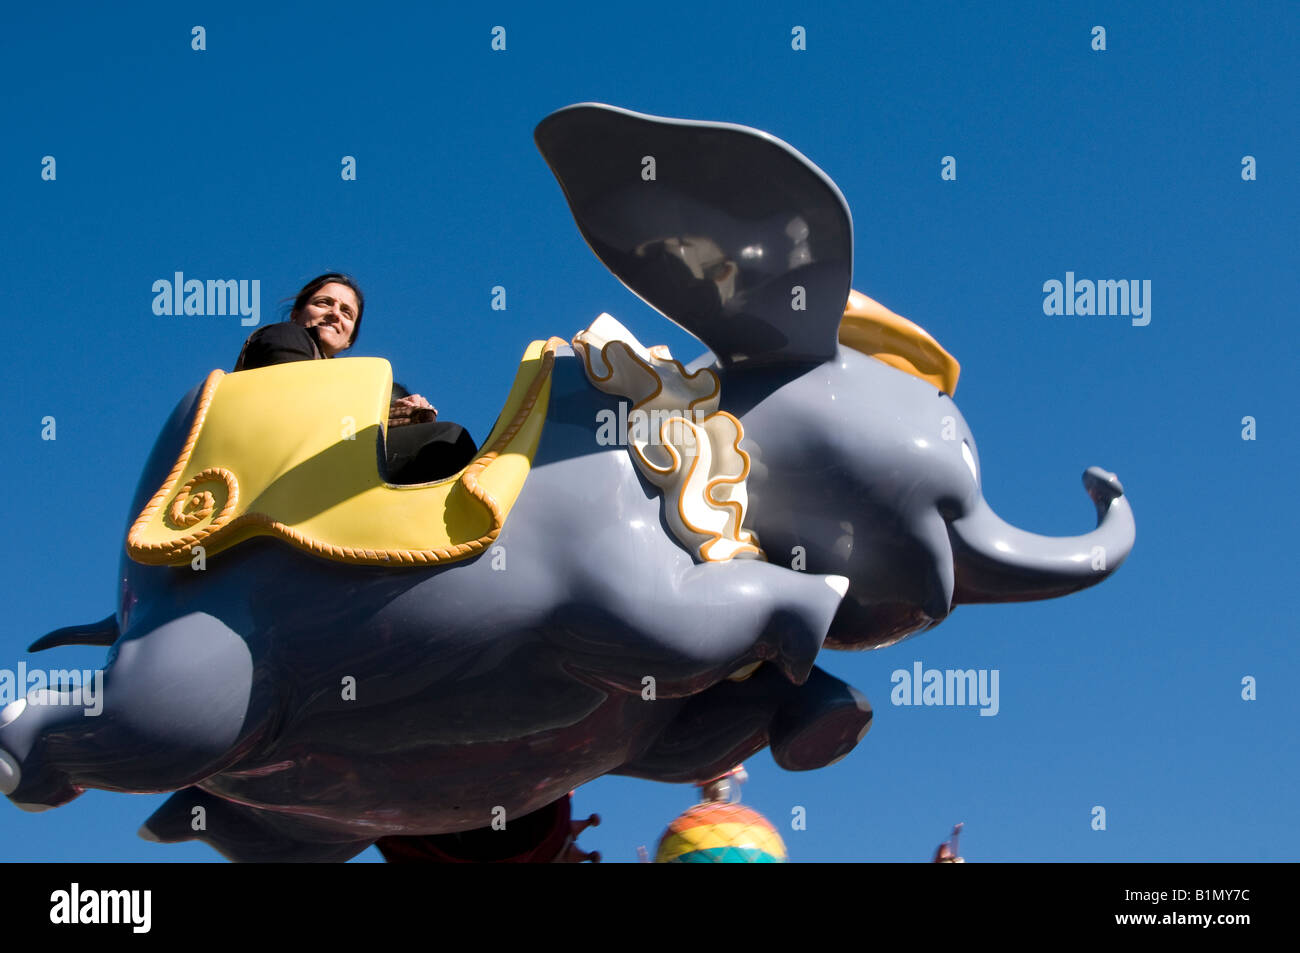 Dumbo the Flying Elephant ride, Disneyland, Anaheim, Californie. Banque D'Images